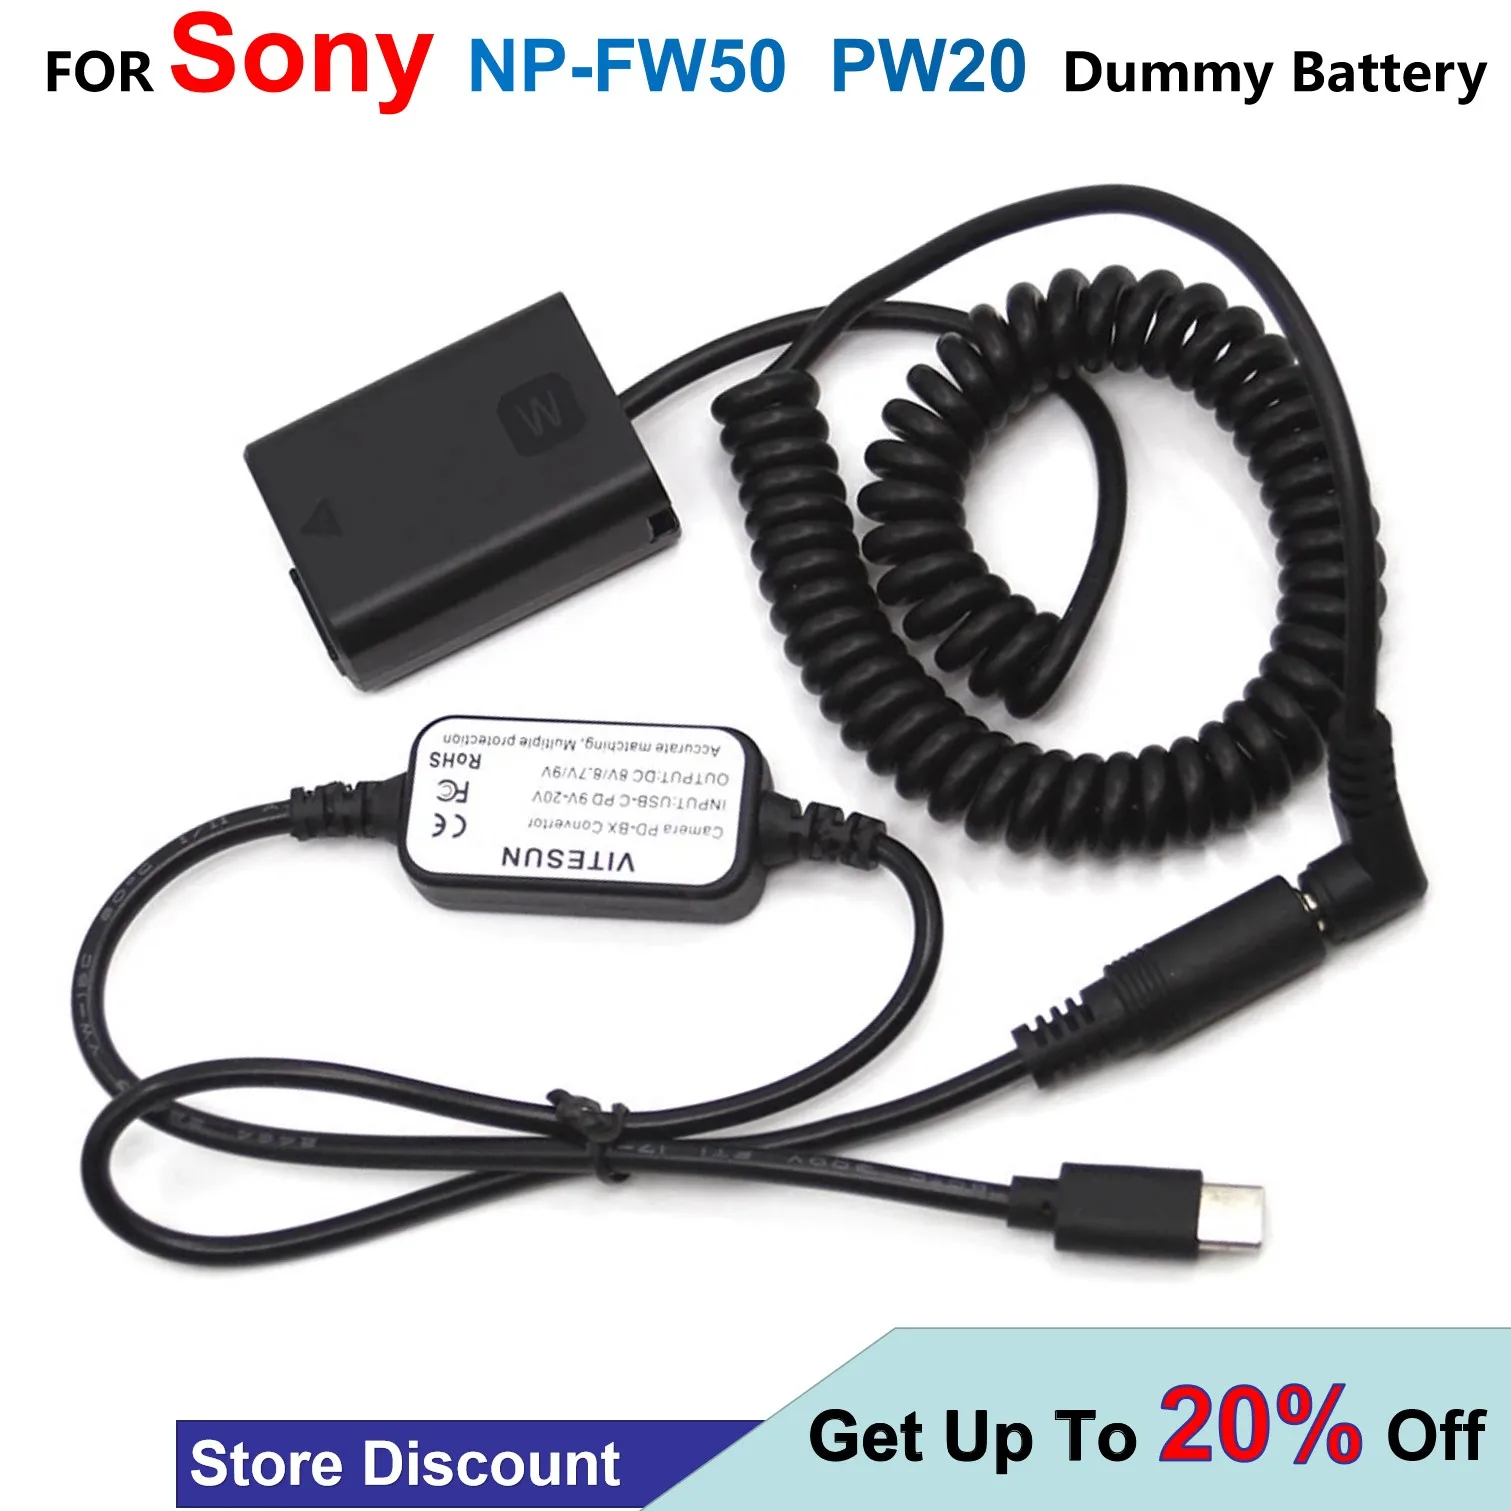 

USB Type-C Power Cable Female Plug + PW20 Dummy Battery NP-FW50 Spring DC Coupler Cable For Sony ZV-E10 A7RII NEX-6 A7000 A7S